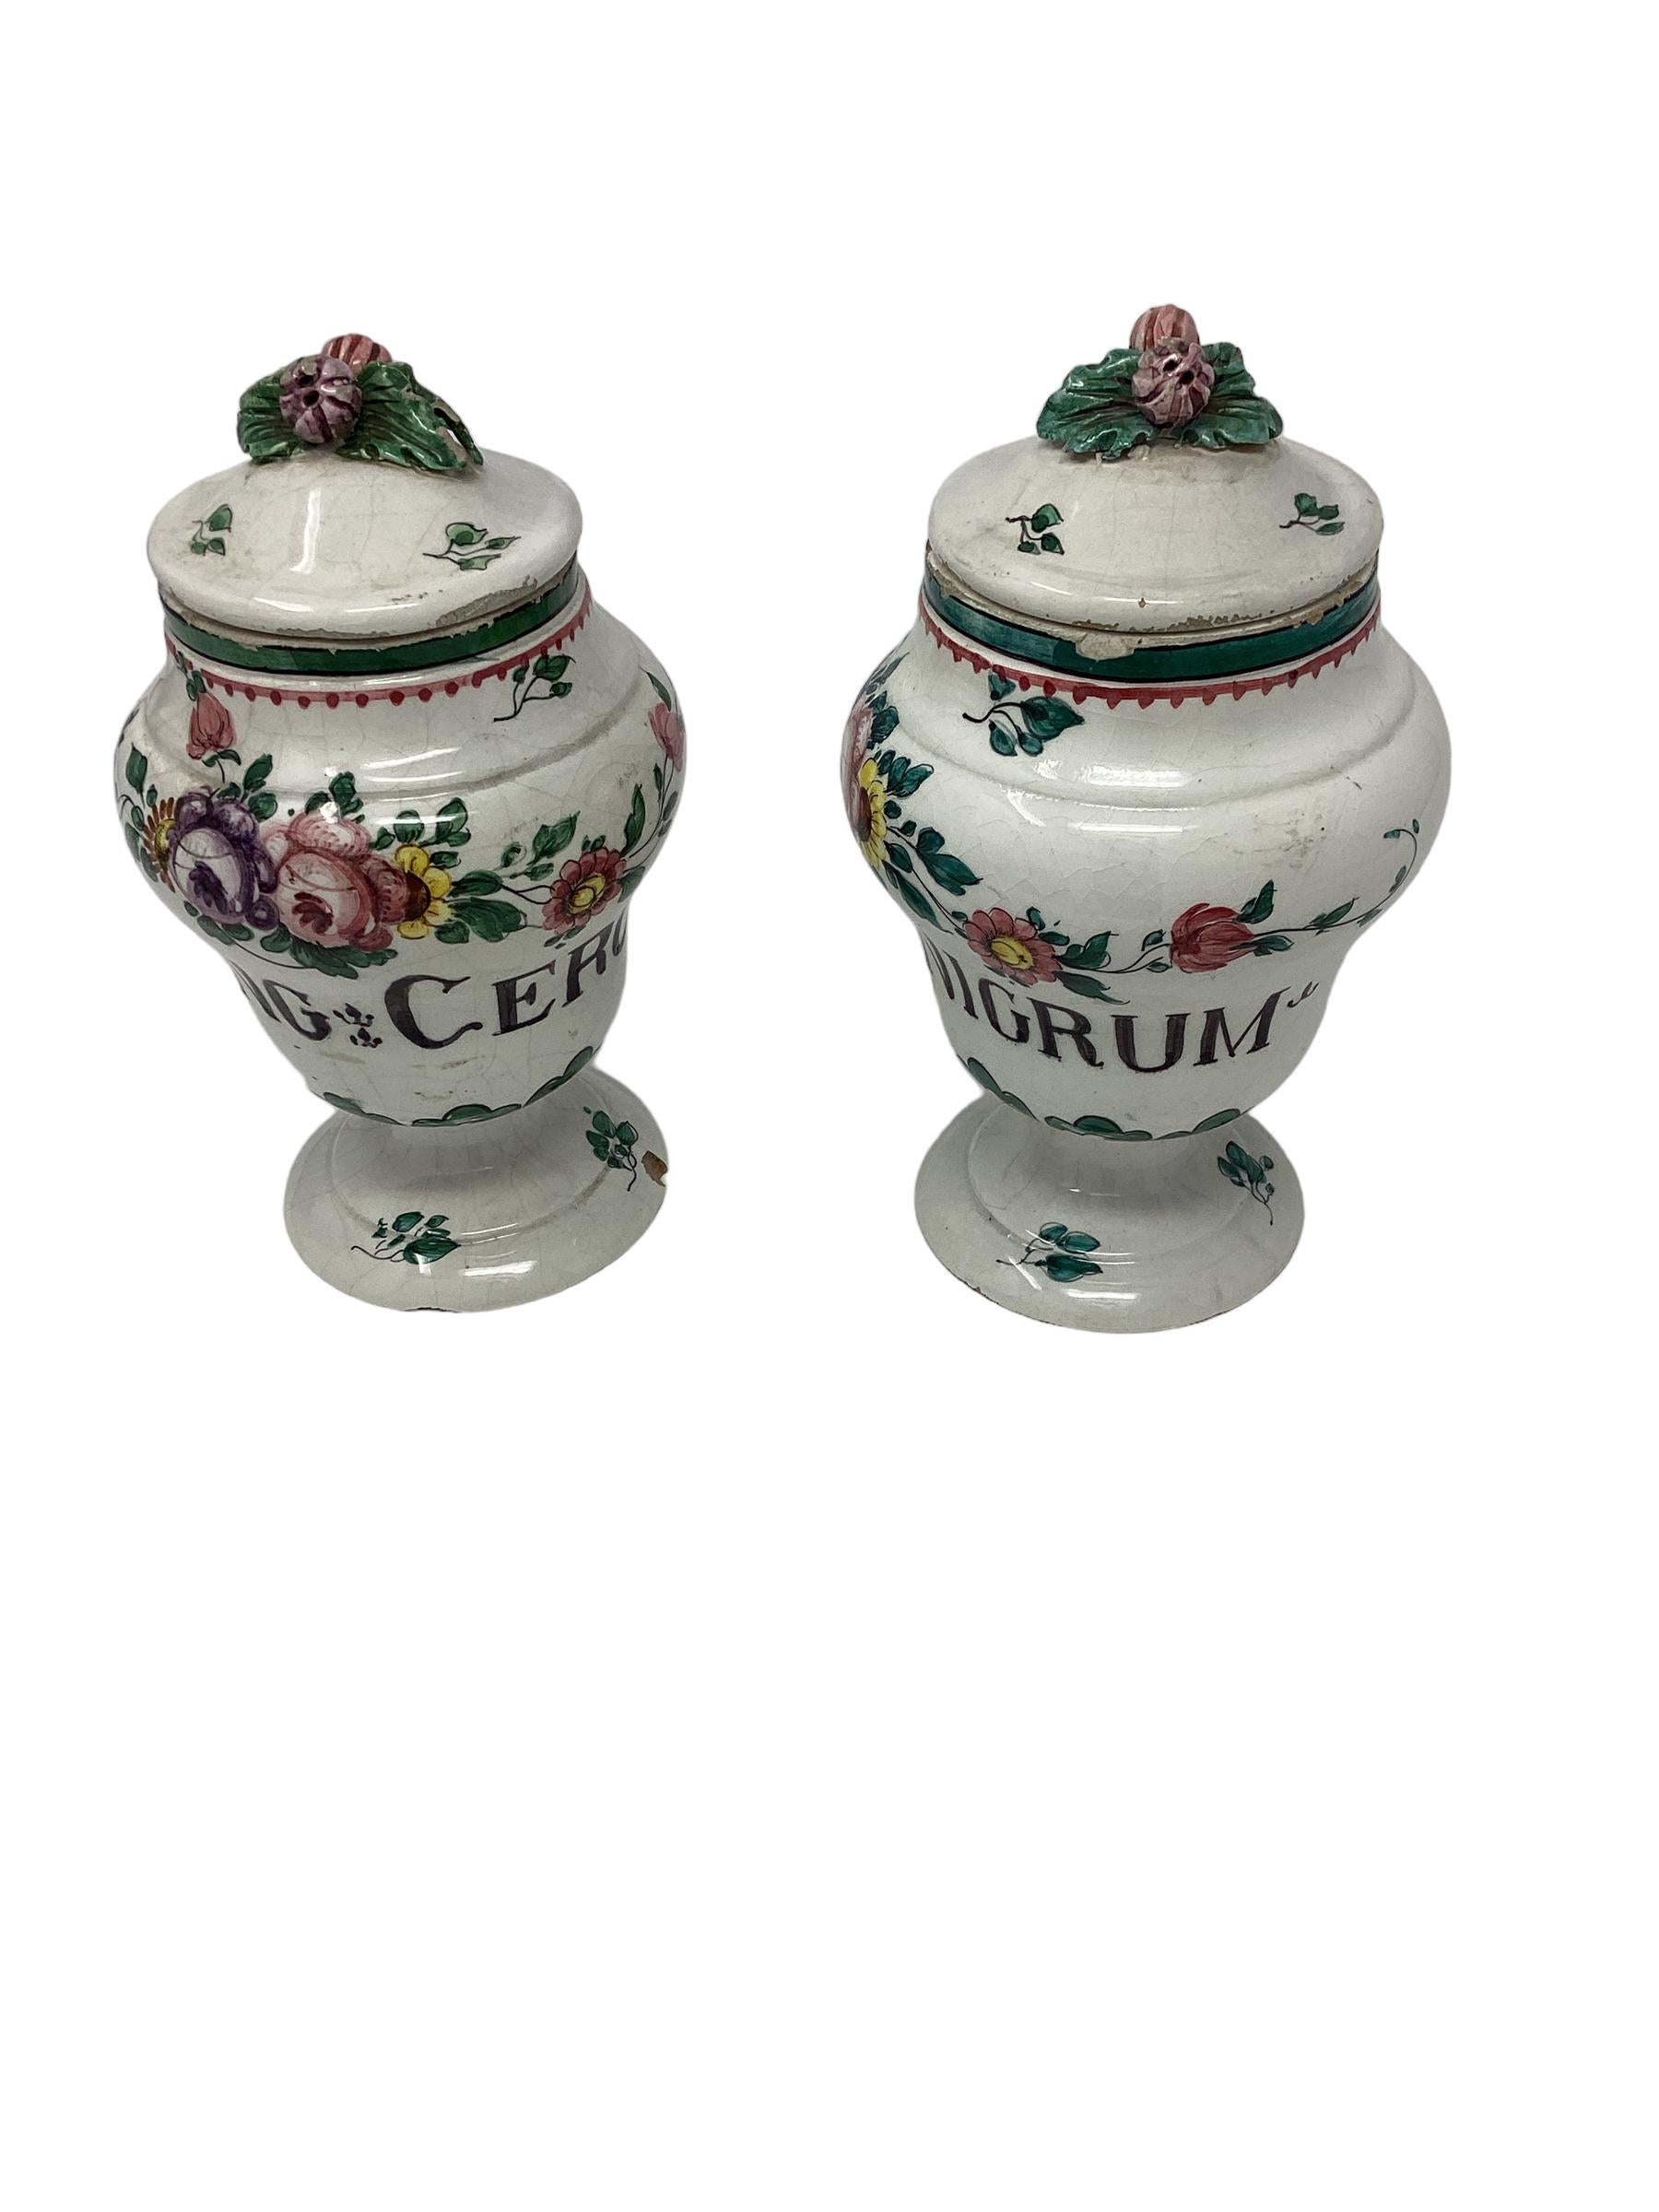 19th Century Italian Faience Floral Decorated Apothecary Jars. Each with applied floral finials. both with latin inscription depicting the type of medicine contained in each jar. One reads 